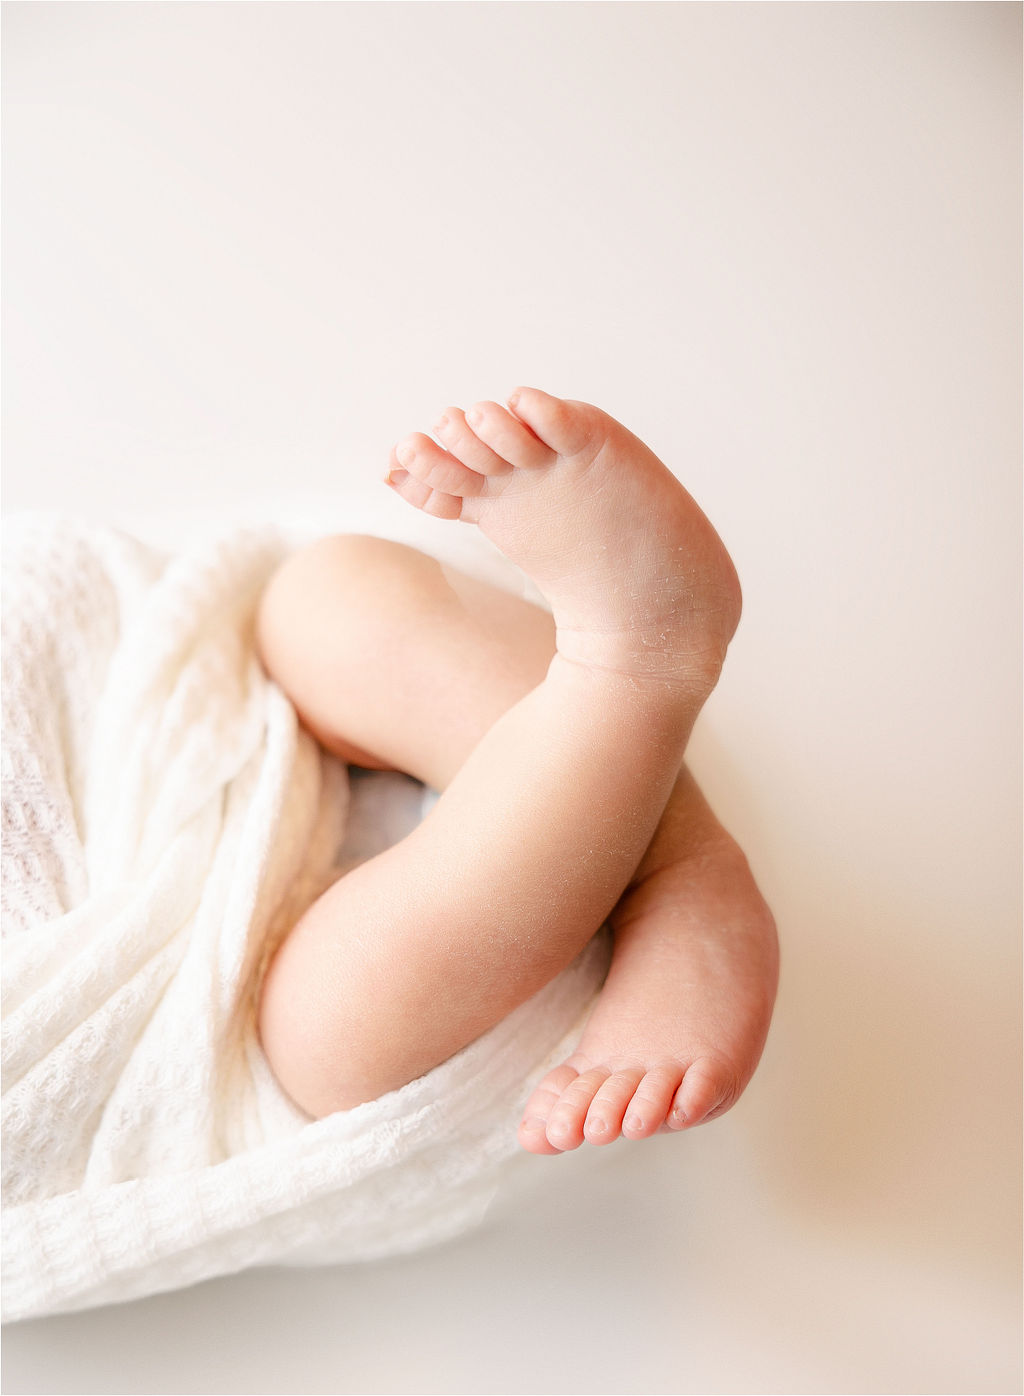 Details of a newborn baby's feet coming out of a white swaddle